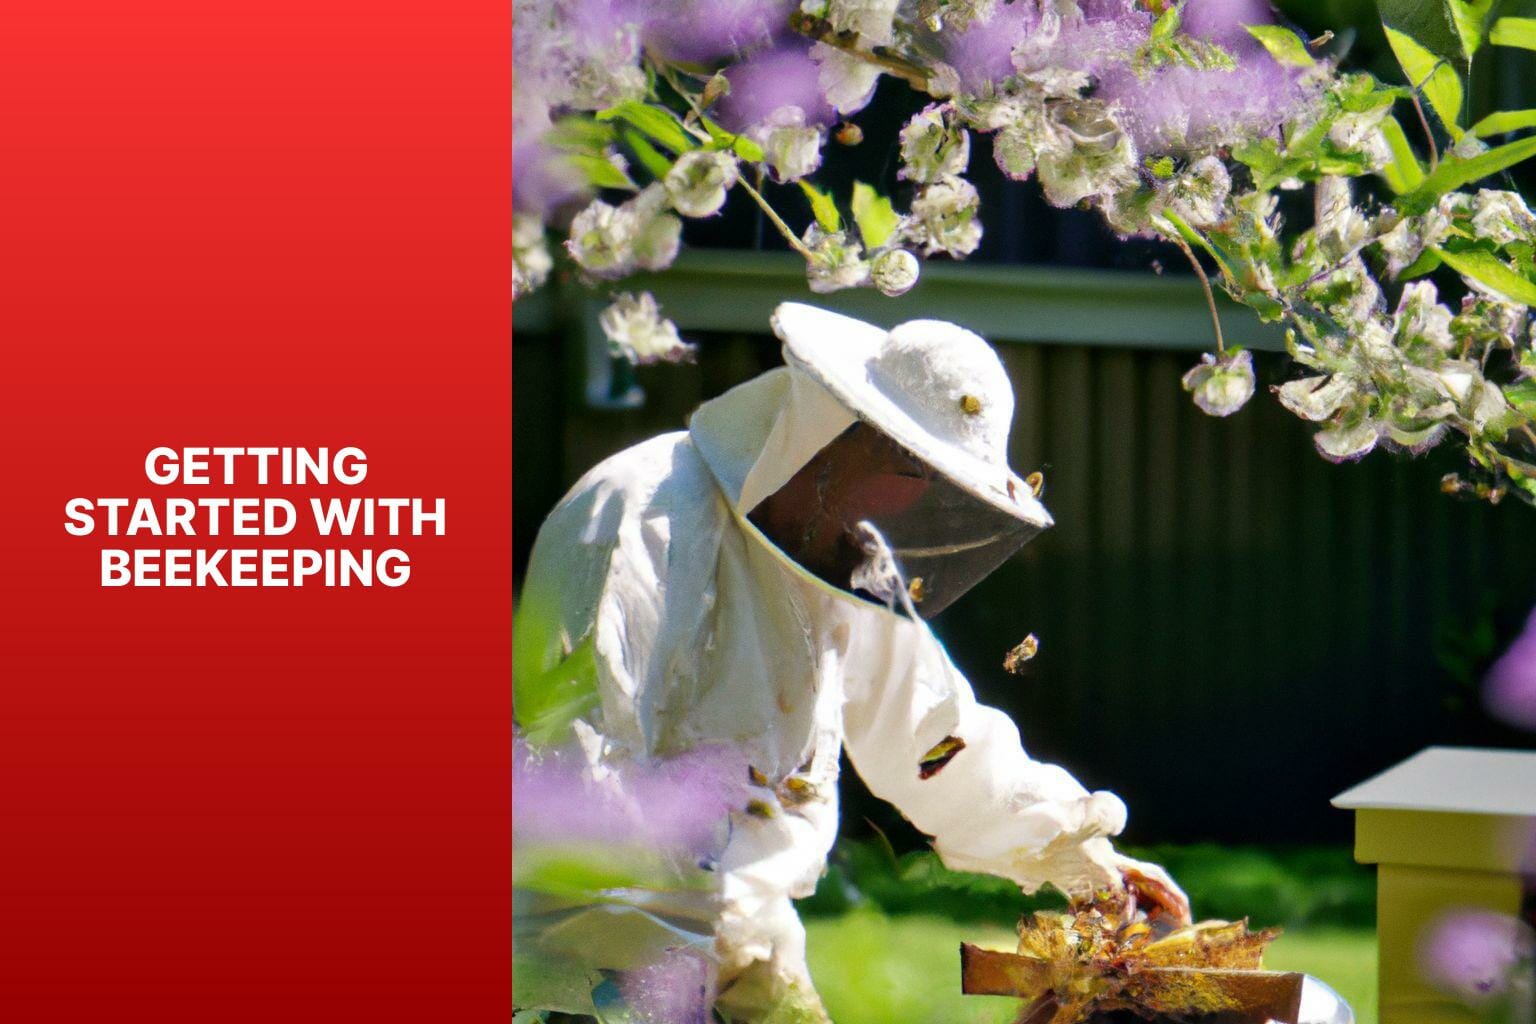 Getting Started with Beekeeping - how to become a beekeeper 